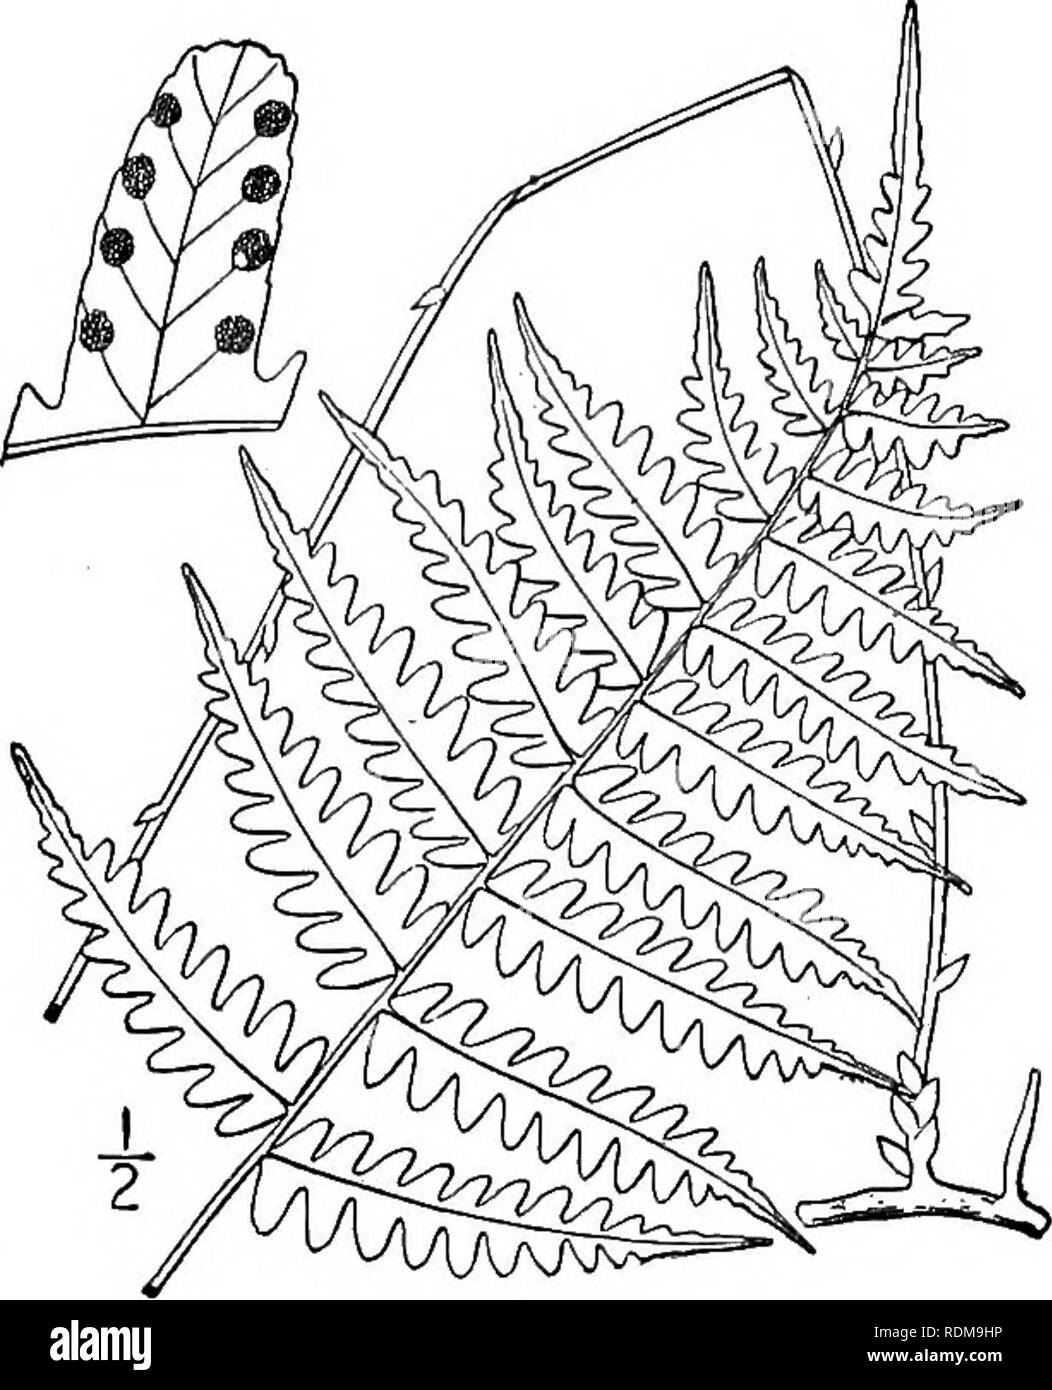 . An illustrated flora of the northern United States, Canada and the British possessions, from Newfoundland to the parallel of the southern boundary of Virginia, and from the Atlantic Ocean westward to the 102d meridian. Botany; Botany. Genus 7. FERN FAMILY. 3. Dryopteris simulata Davenp. Dodge's Shield-fern. Fig. 39. Aspidium simulatum Davenp. Bot. Gaz. ig: 495. 1894. Dryopteris simulata Davenp. Bot. Gaz. 19: 497. 1894. As synonym. Rootstock wide-creeping, slender, brownish; stipes 6'-2o' long, straw-colored, dark brown at base, with deciduous scales; blades 8'-2o' long, 2-7' wide, oblong-lan Stock Photo